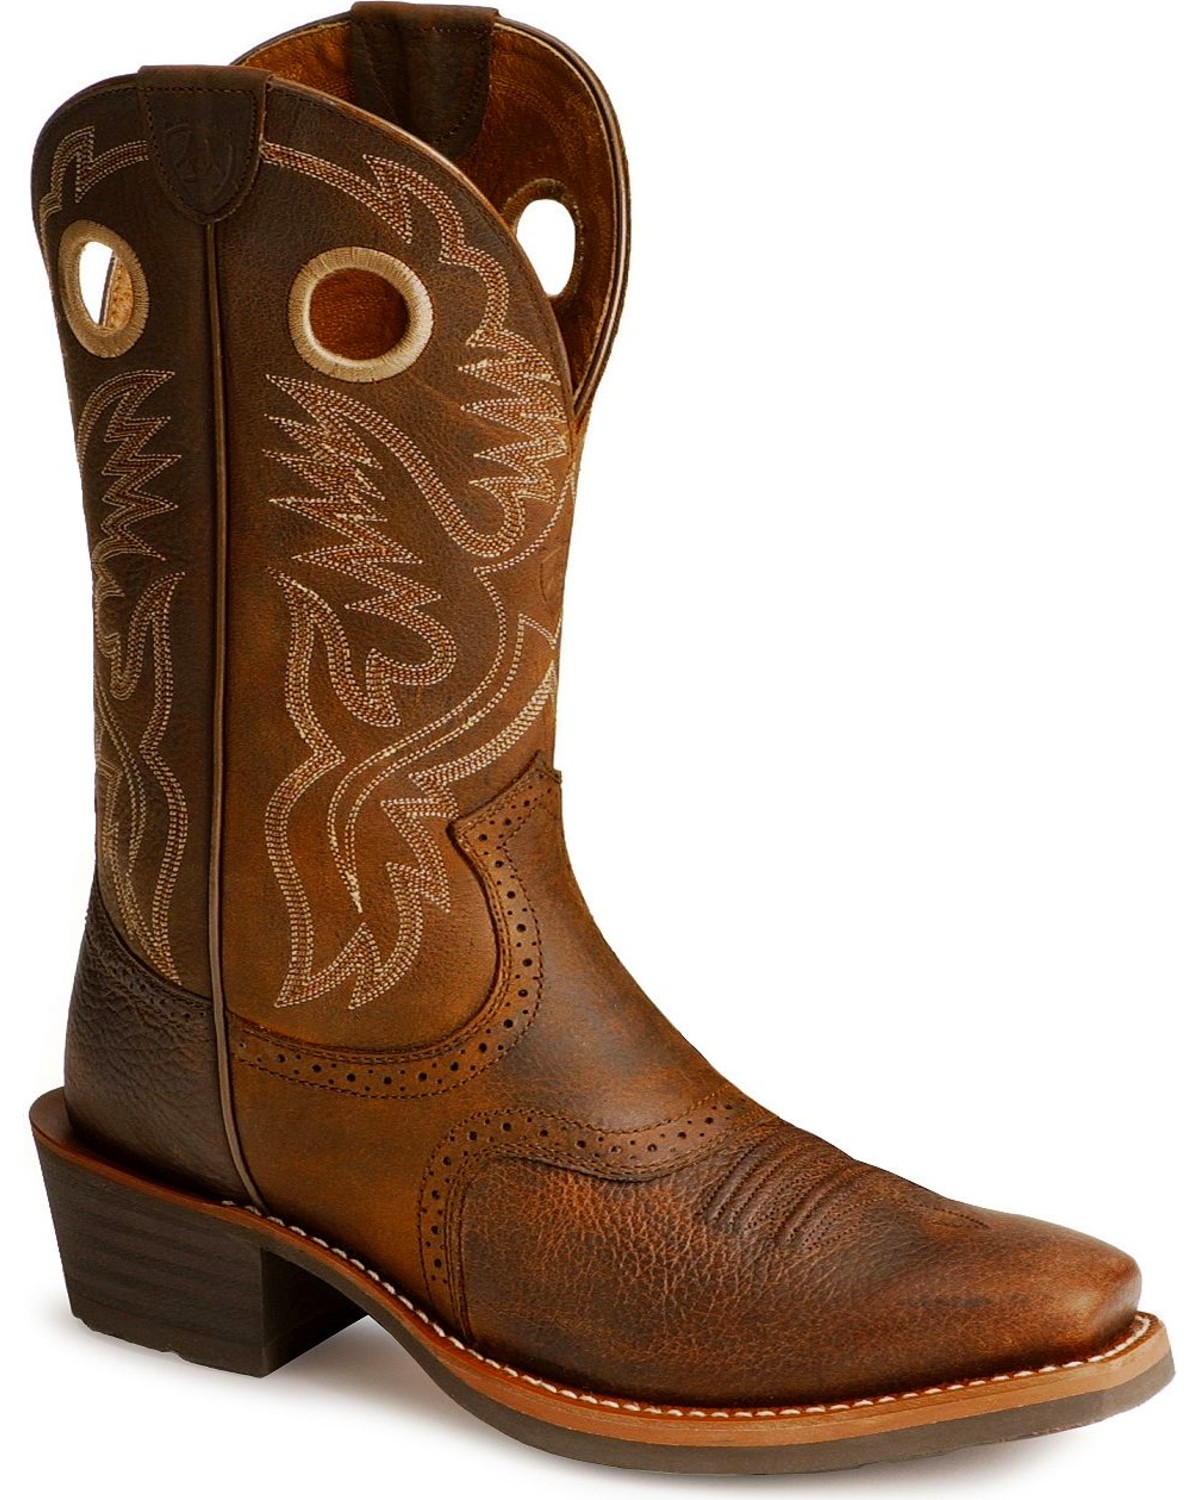 Ariat Heritage Roughstock Wide Square Toe Western Boots Men/’s Leather Cowboy Western Boot